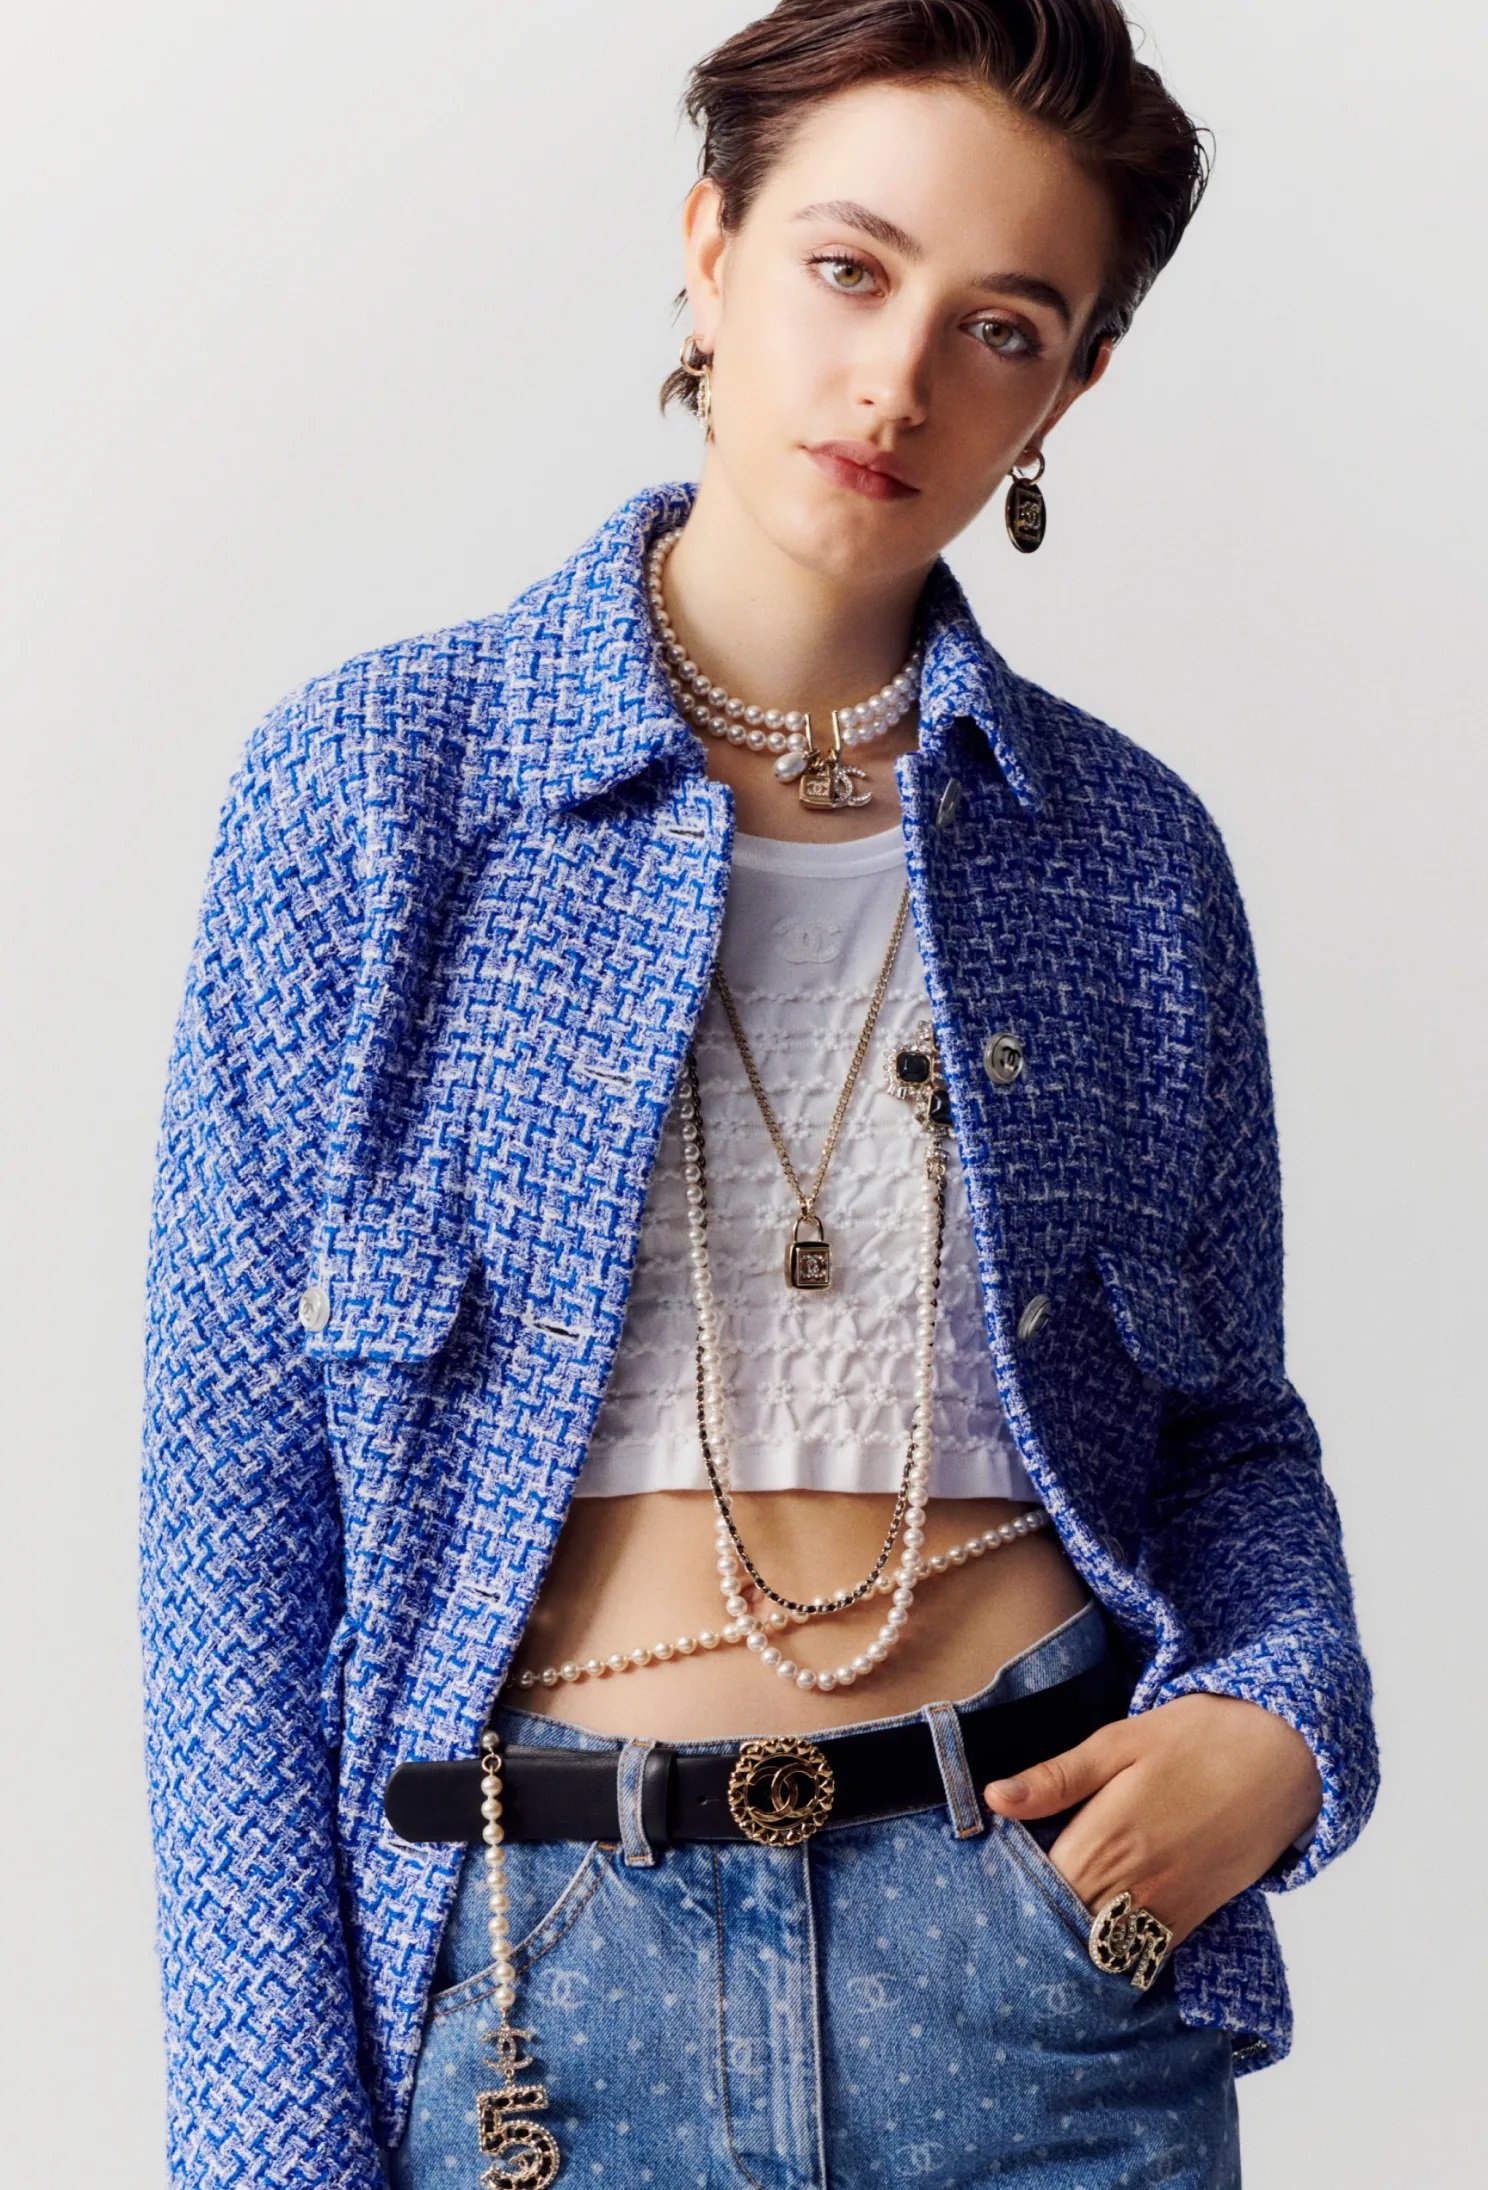 Chanel Cotton Tweed Jacket with Front Pockets in Blue White & Navy Blue.jpg